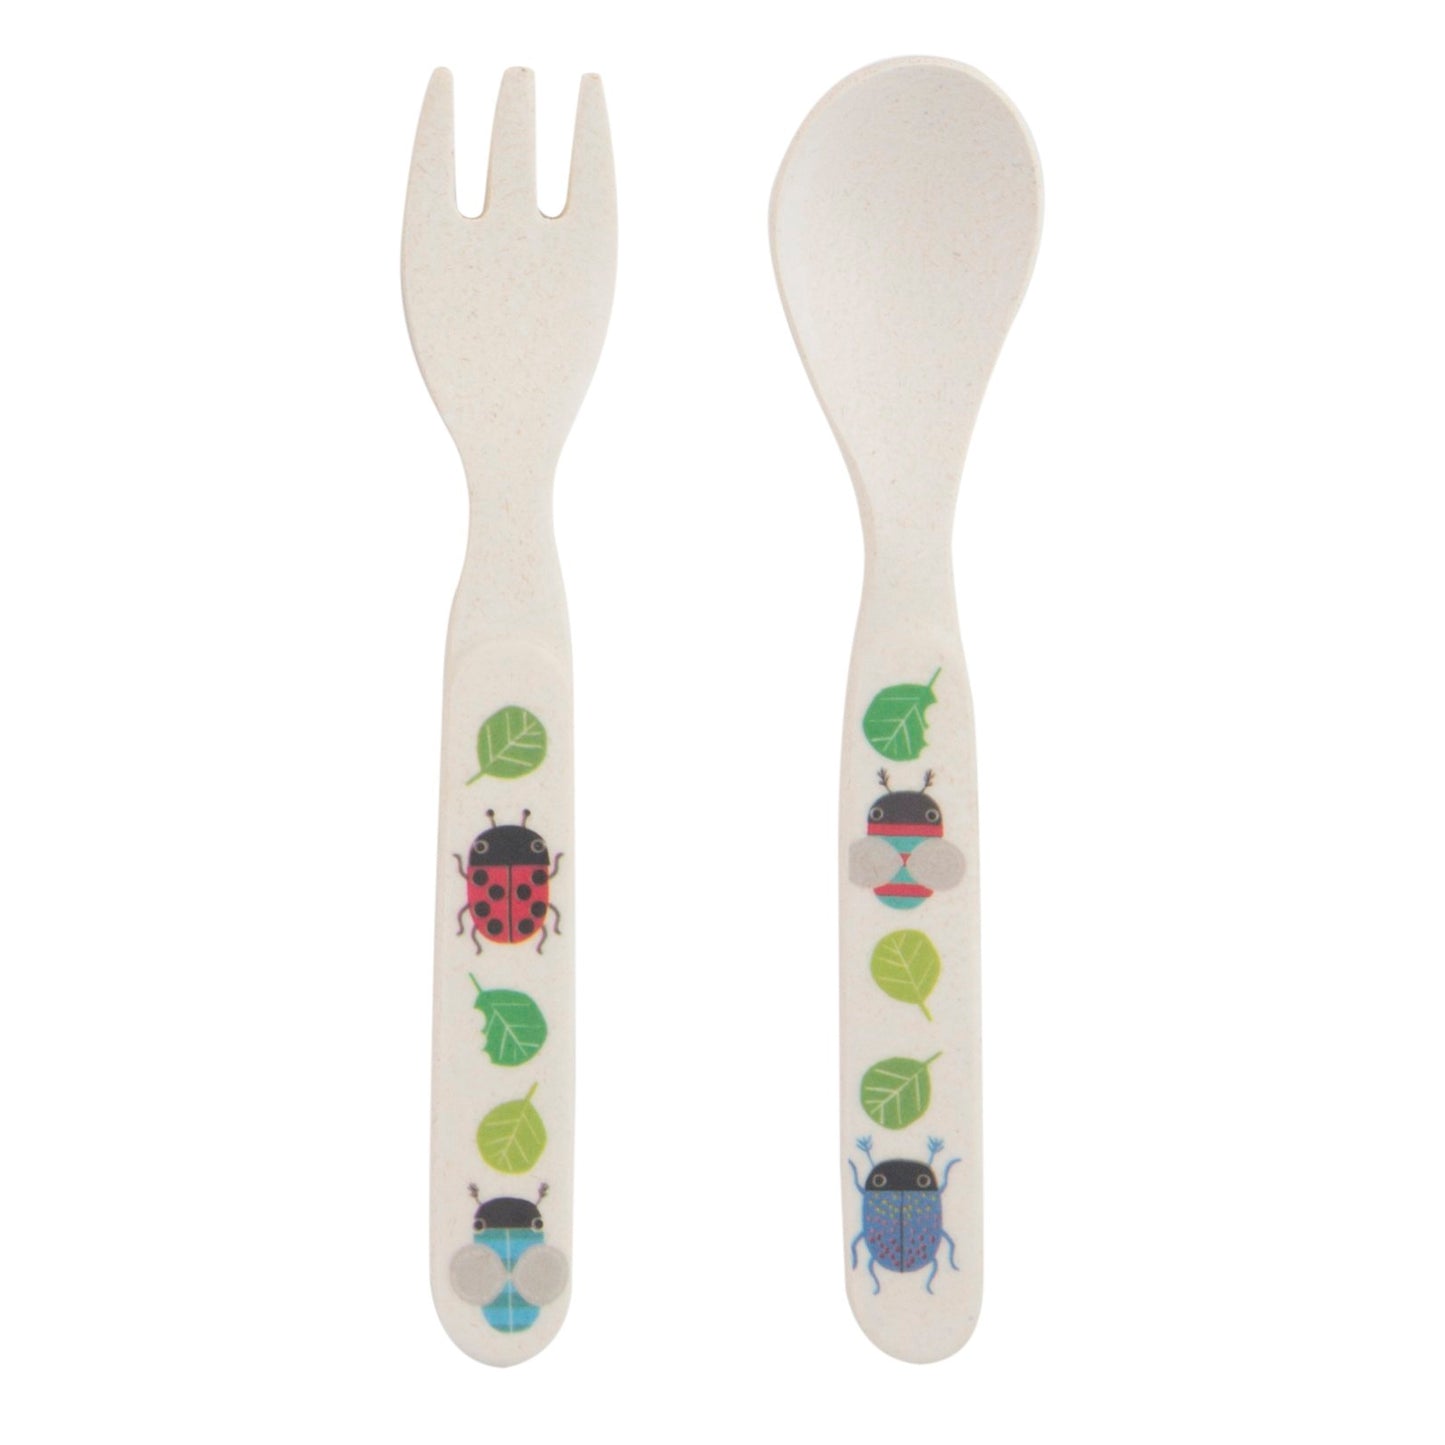 Explore nature with this gorgeous bamboo cutlery set (fork and spoon) featuring a fun 'busy bugs' design.